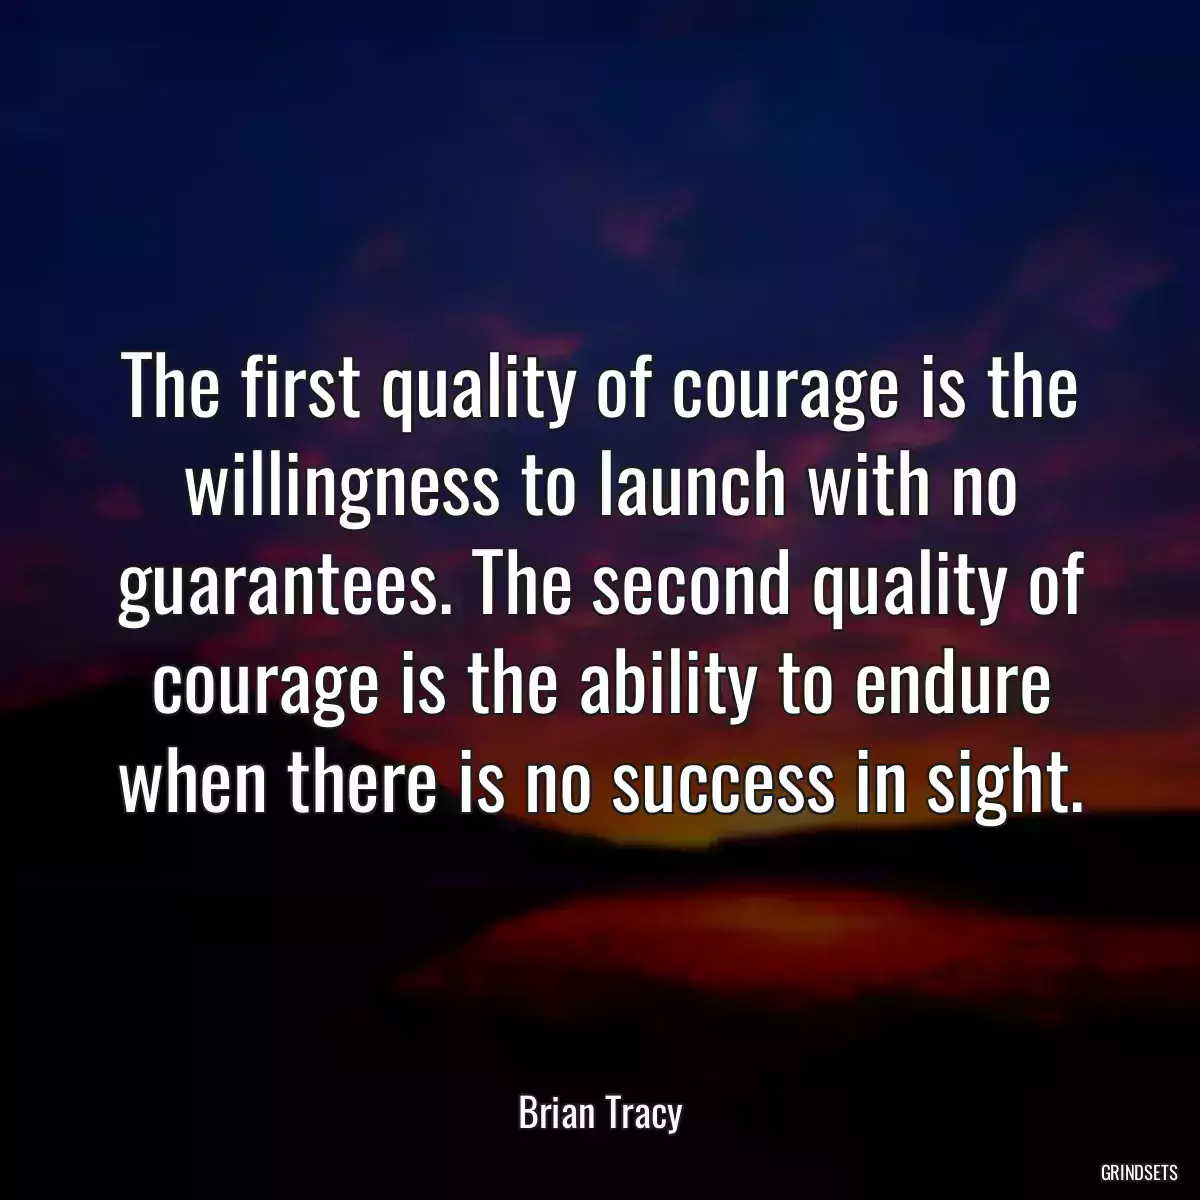 The first quality of courage is the willingness to launch with no guarantees. The second quality of courage is the ability to endure when there is no success in sight.